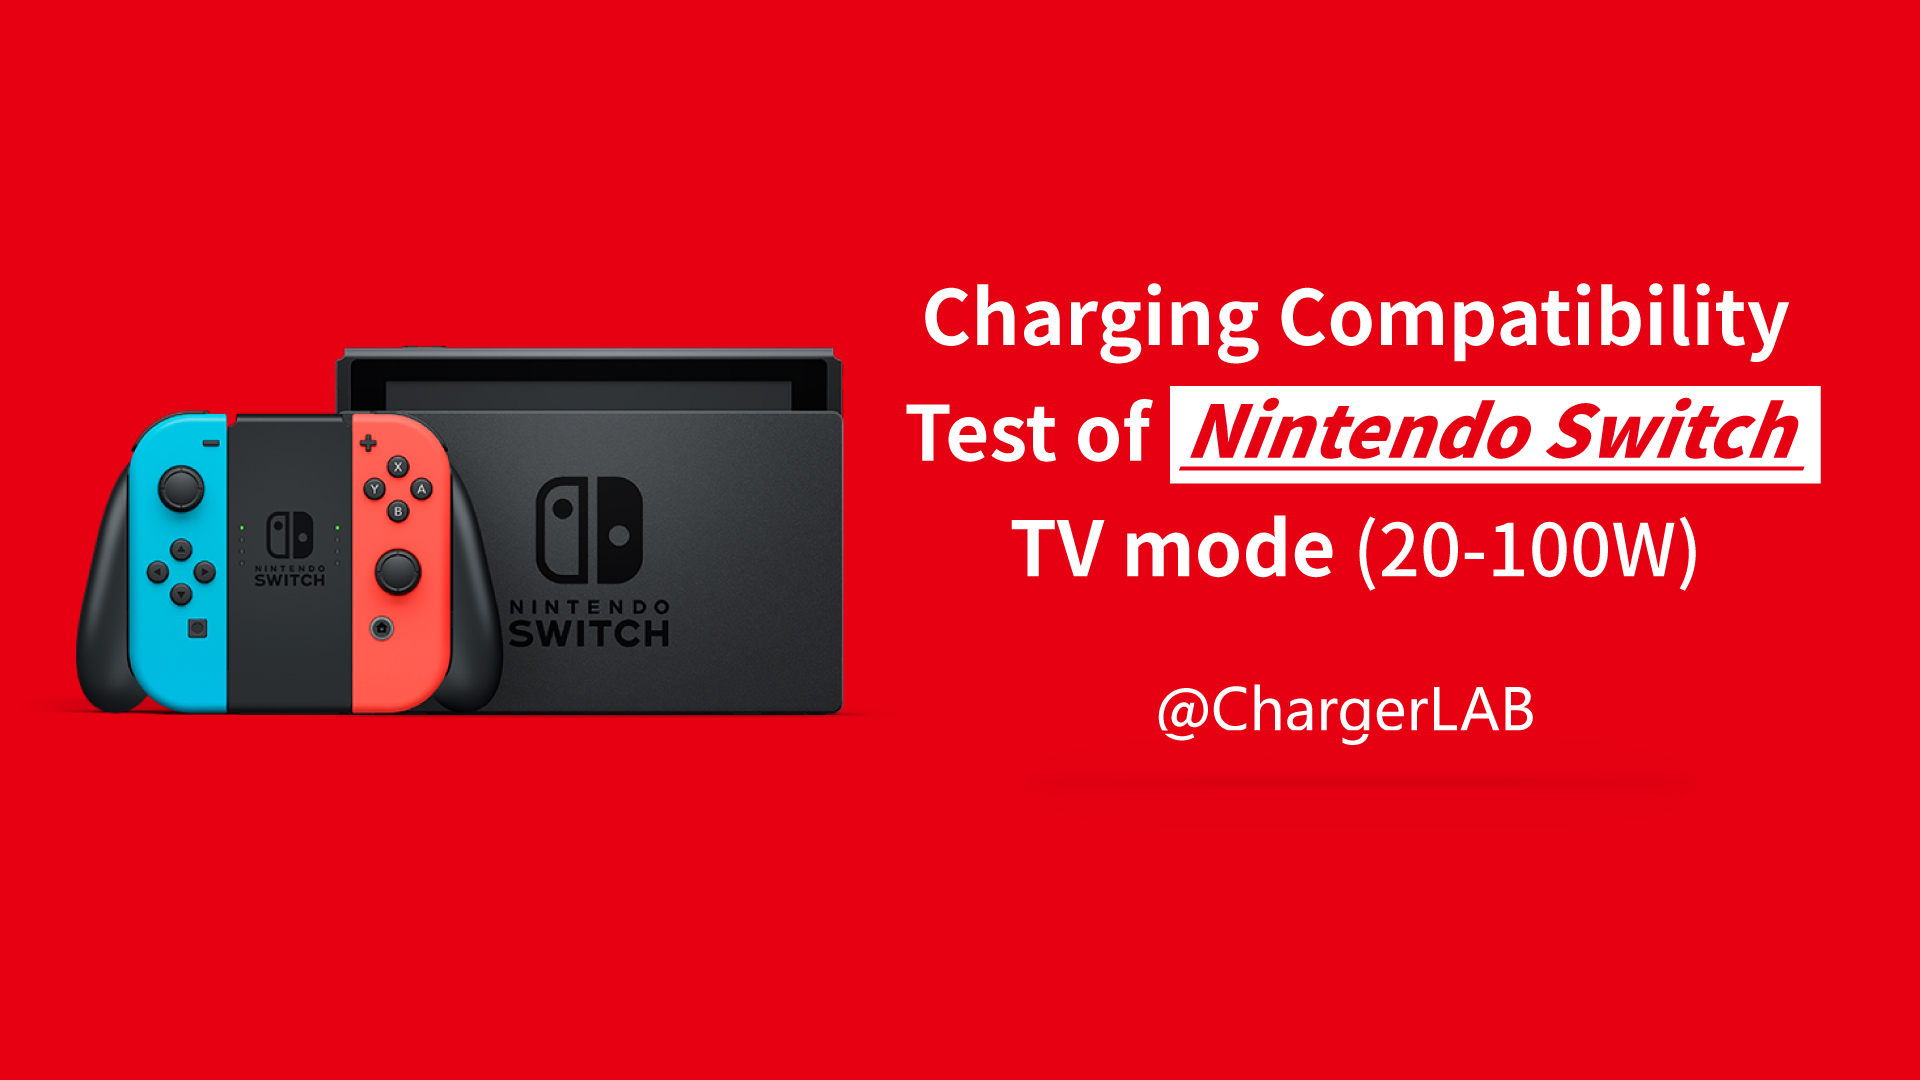 Charging Compatibility Between the Nintendo Switch and iPad